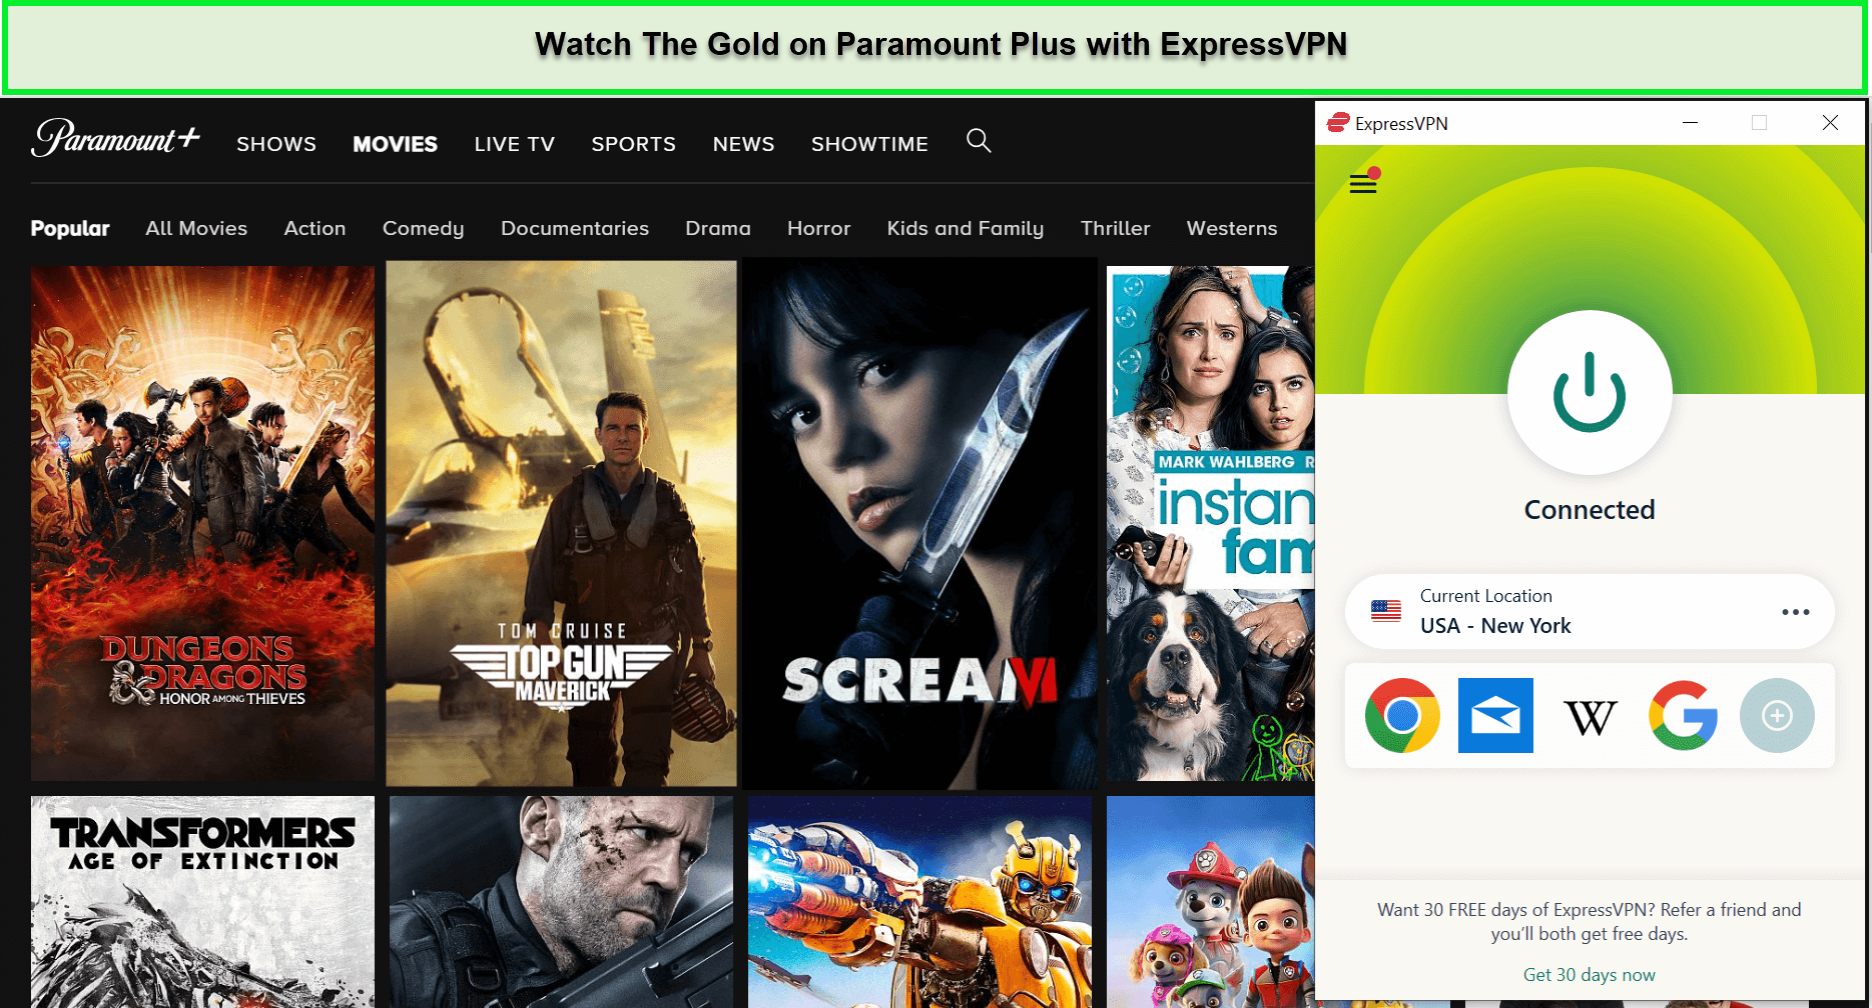 Watch-The-Gold-in-Australia-on-Paramount-Plus-with-ExpressVPN